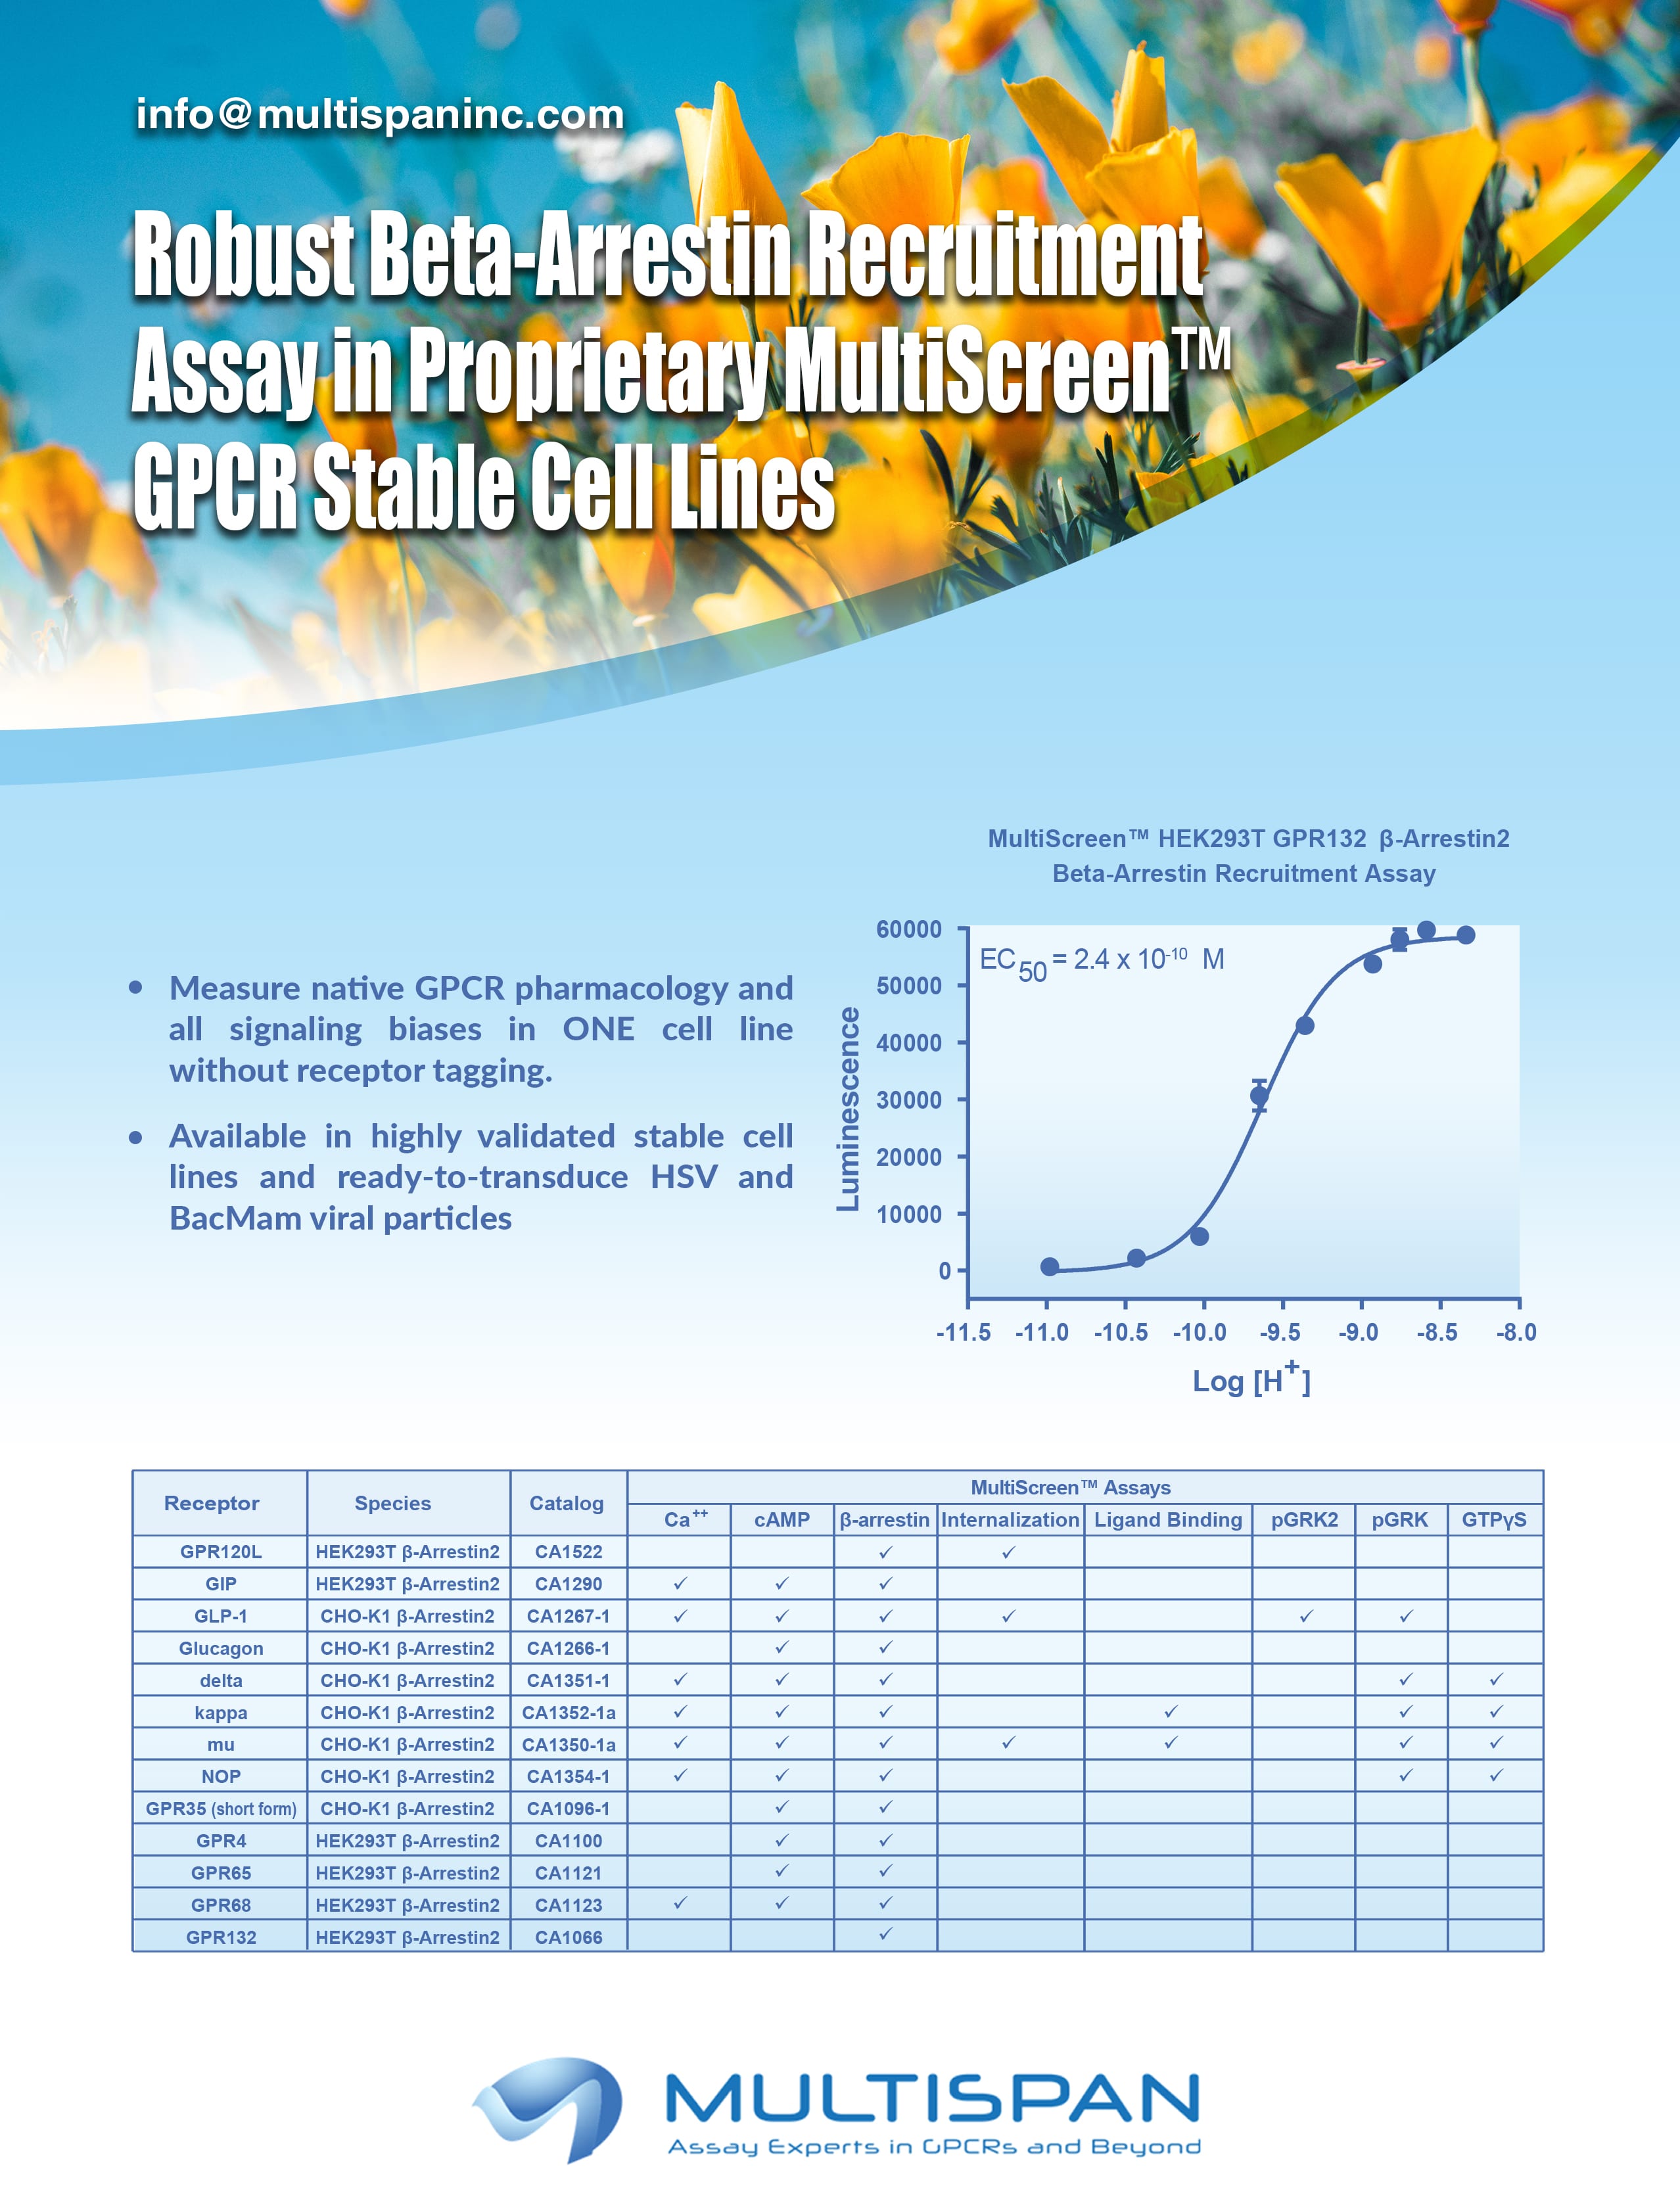 New Cell-based Assays Developed by Multispan